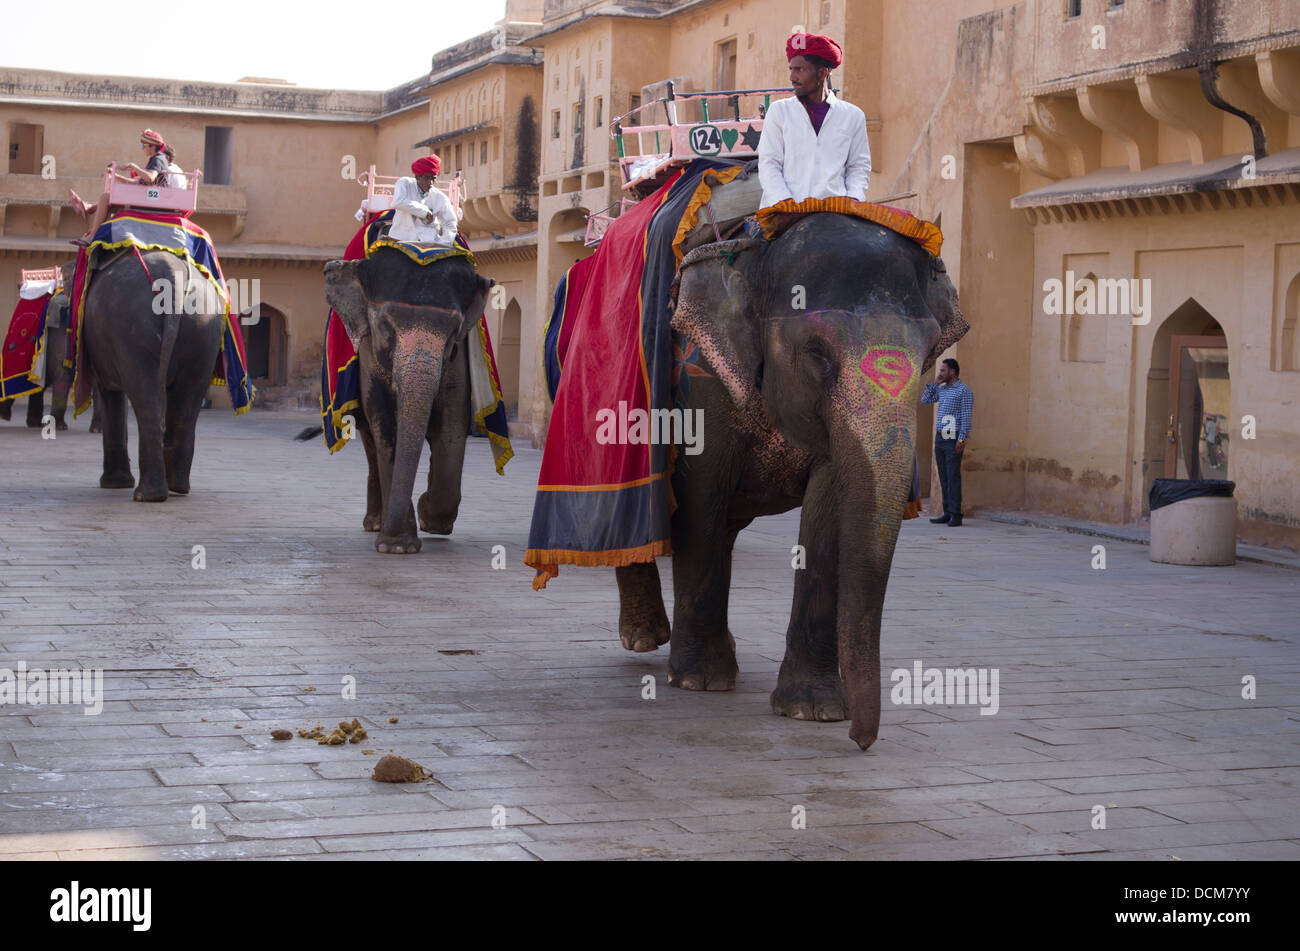 Indian Elephants that take tourists for rides up to Amber ( Amer ) Fort / Palace - Jaipur, Rajasthan, India Stock Photo